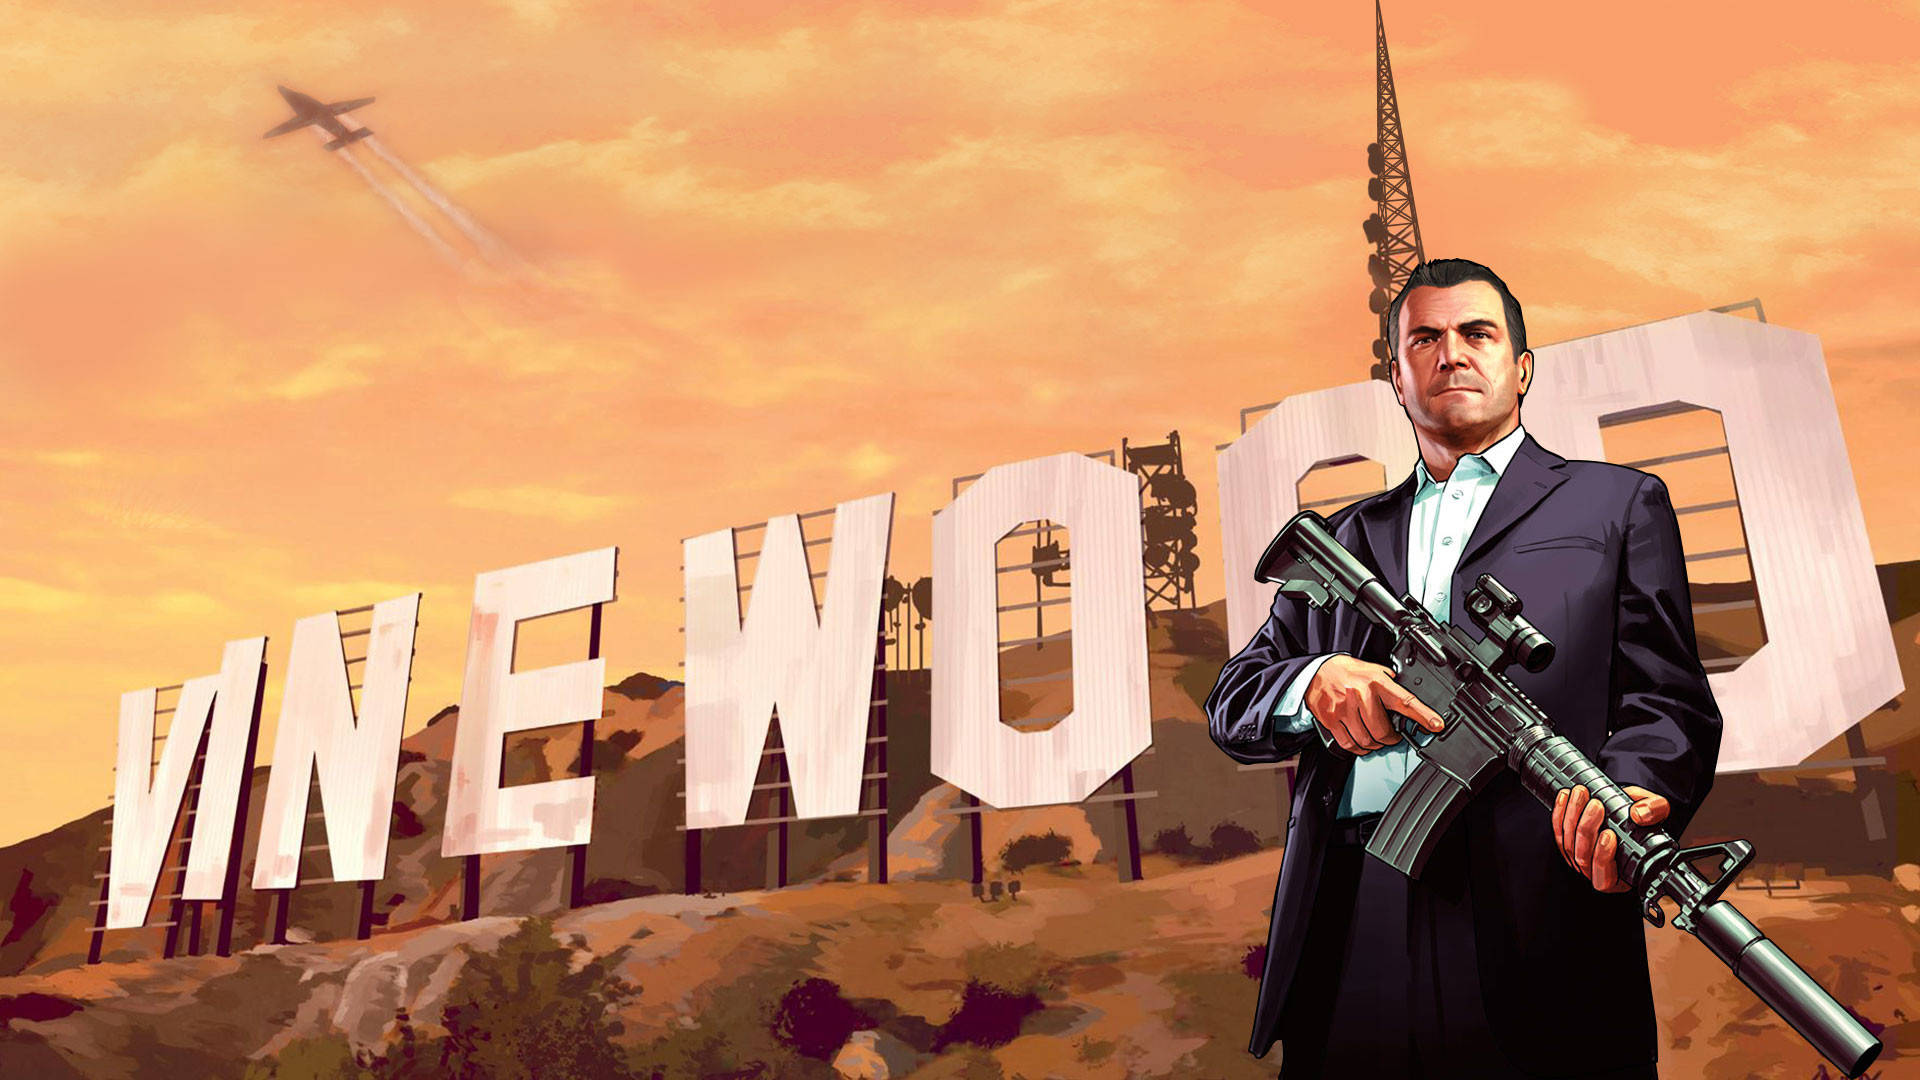 Gta 5 1920X1080 Wallpaper and Background Image